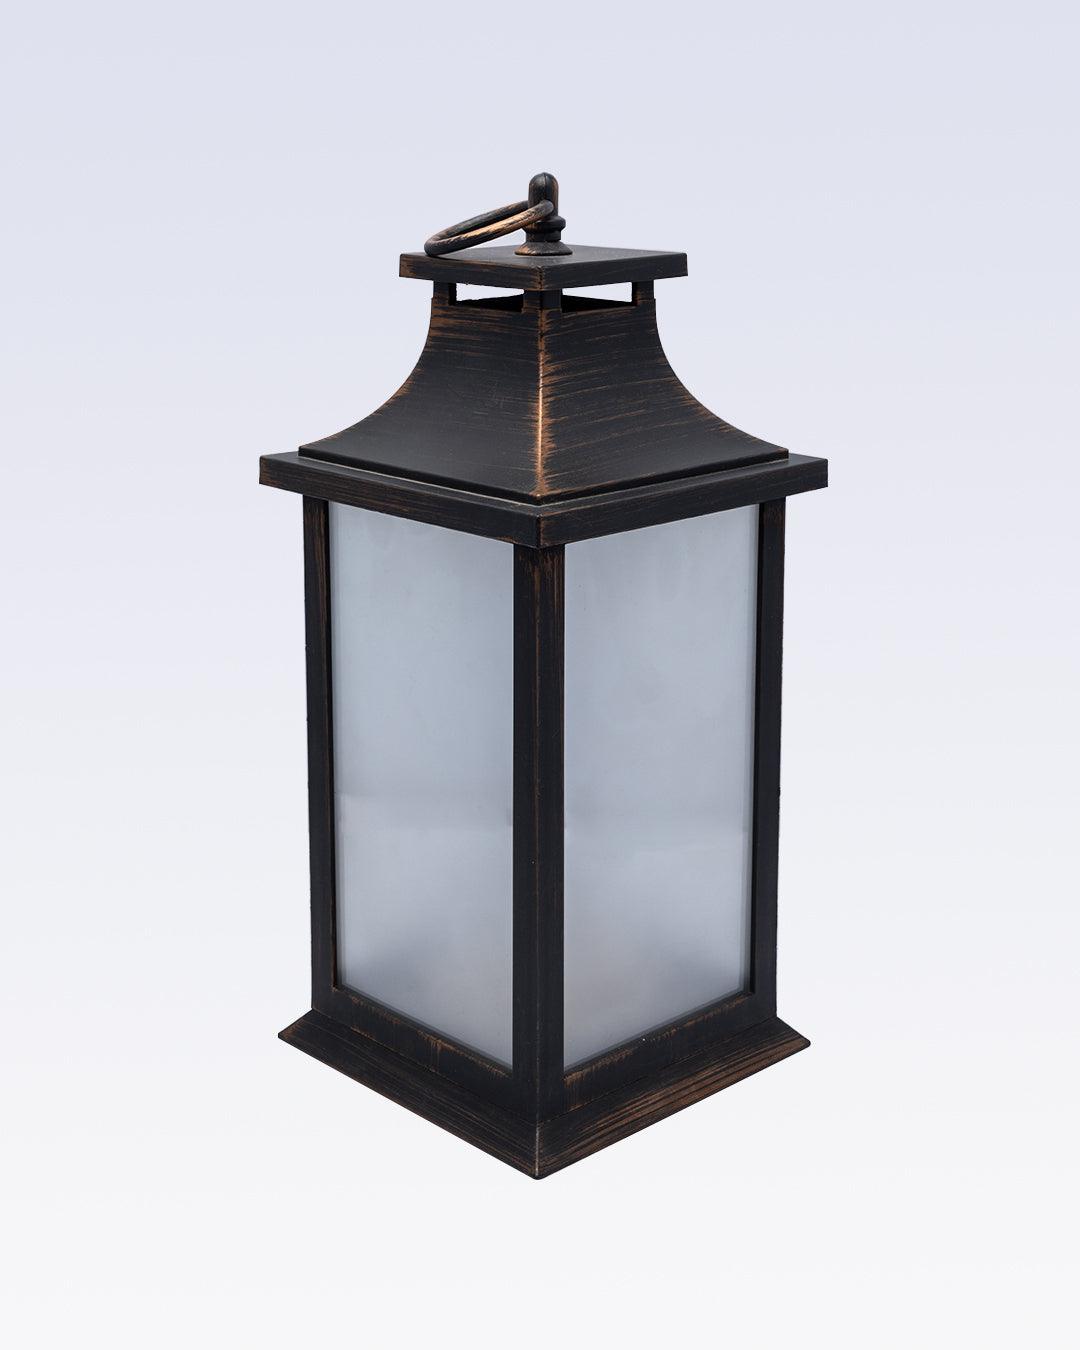 Market99 Decorative Lantern, Lamp, Battery Operated, for Outdoor & Indoor, Hanging, Table Decoration, Black, Plastic - MARKET 99